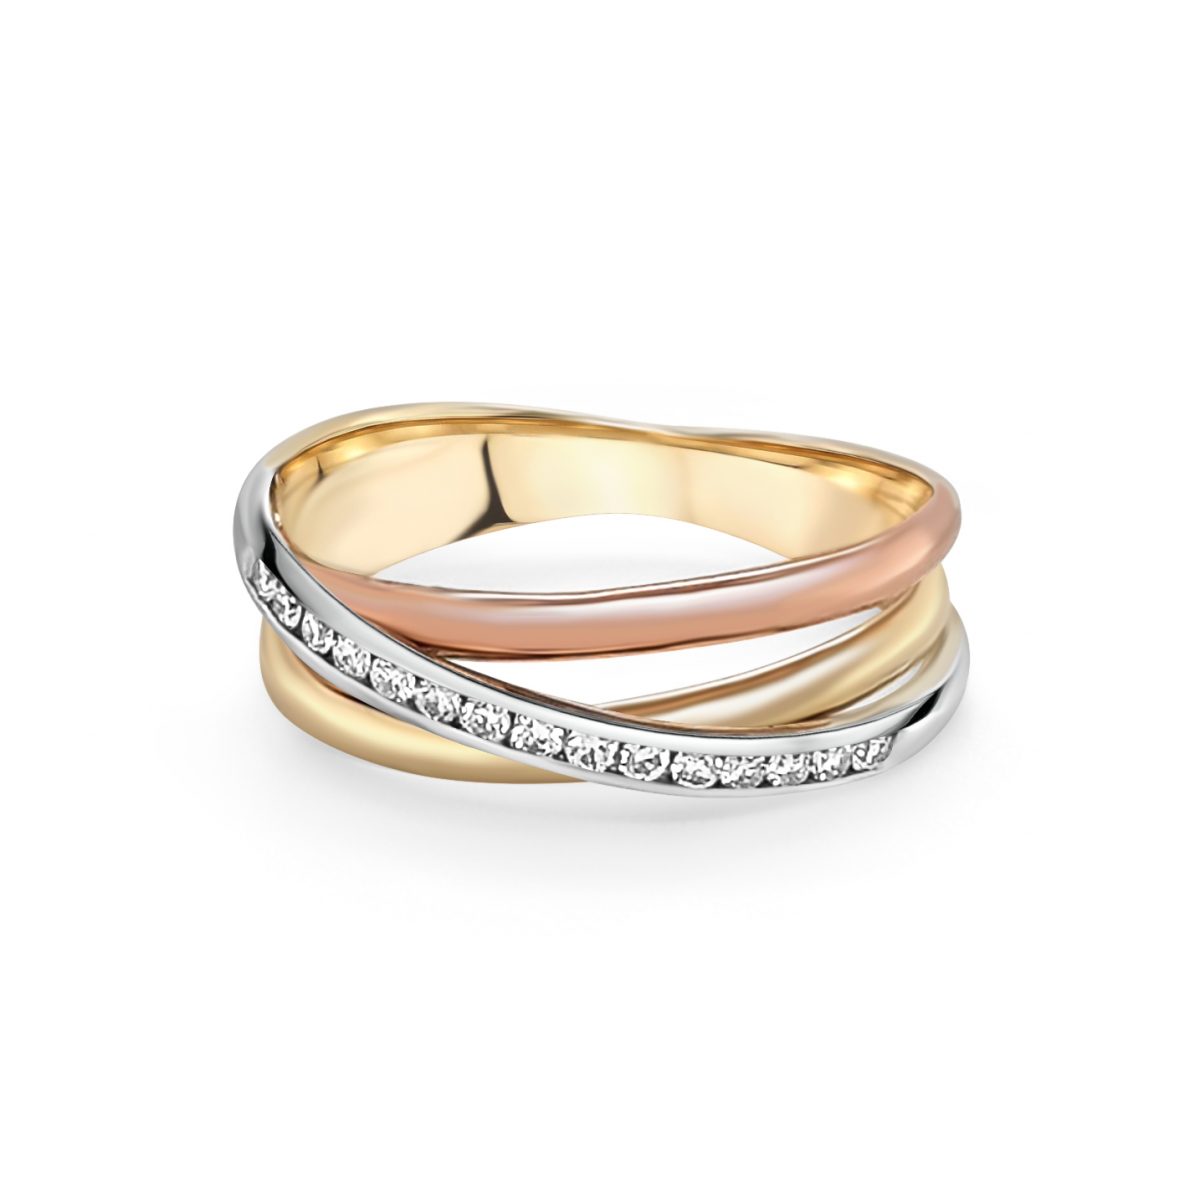 9ct White, Yellow, and Rose Gold Ring with Diamonds